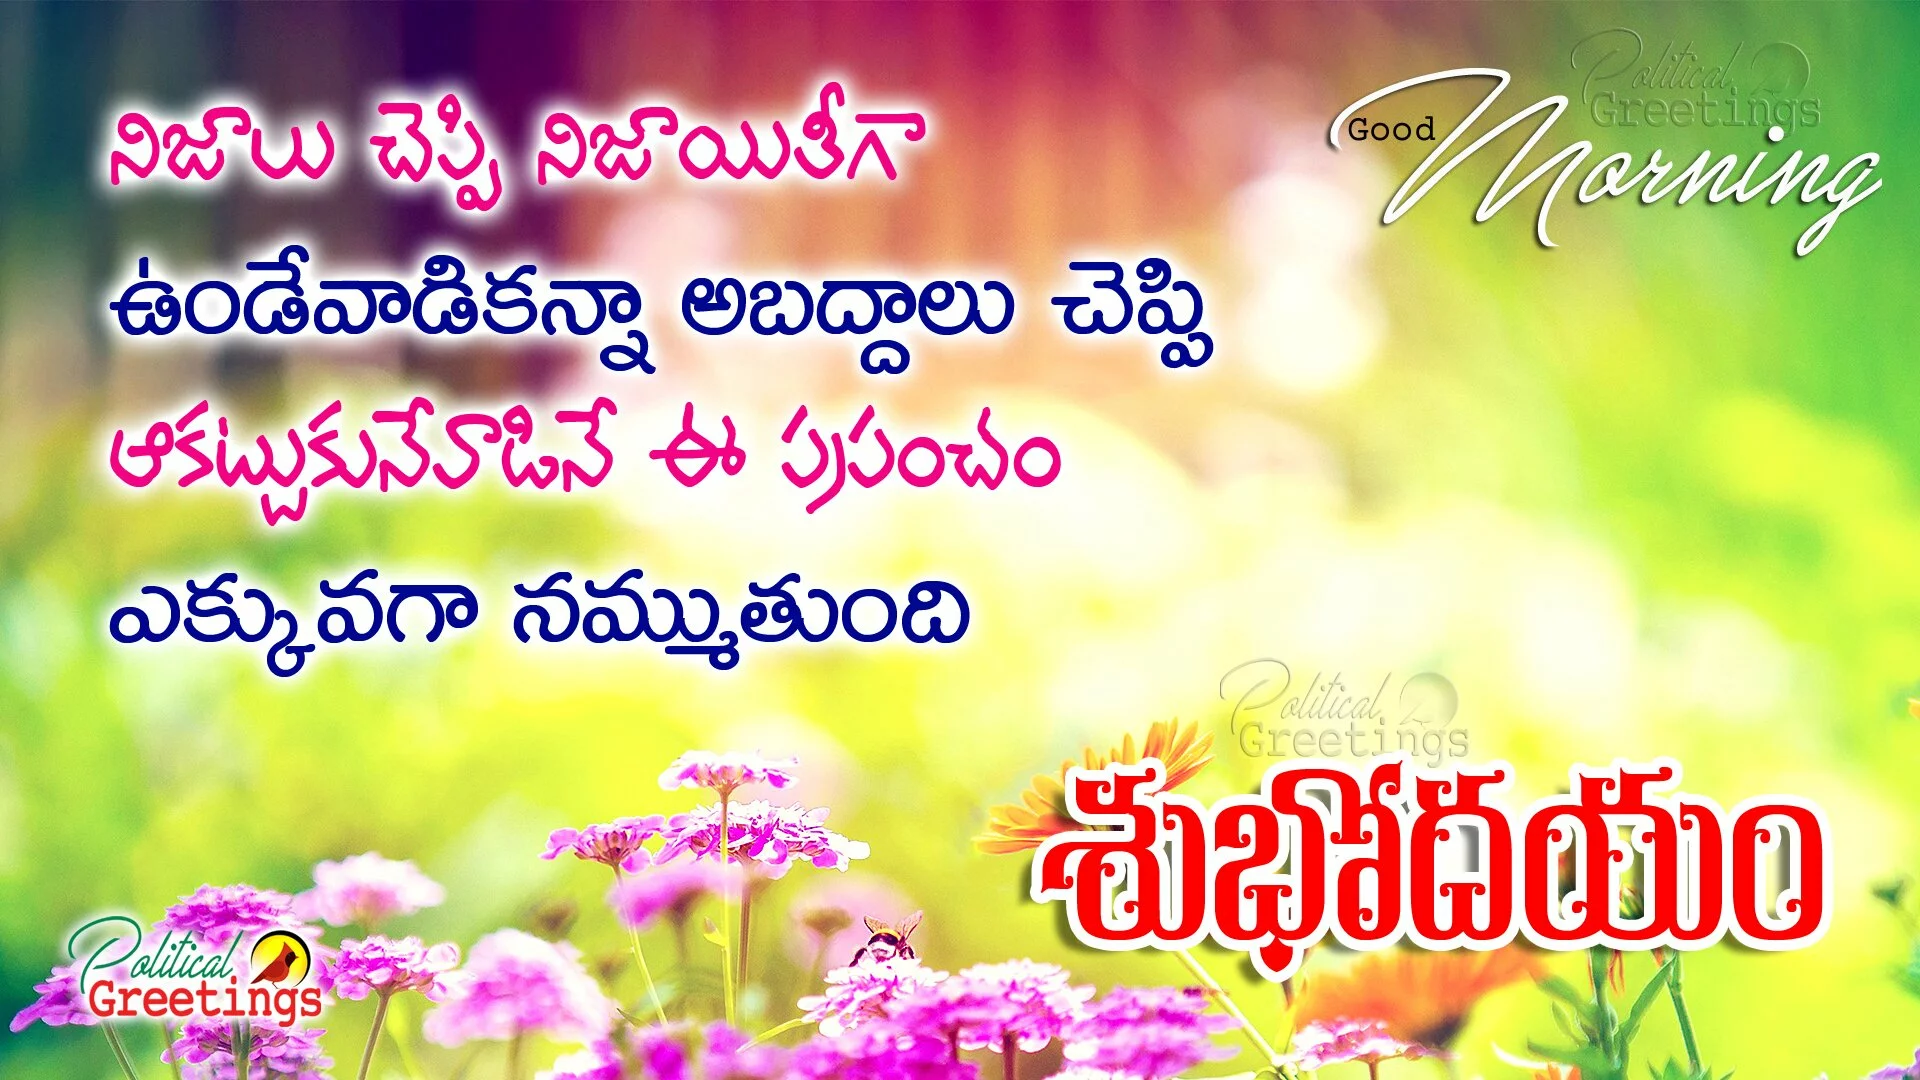 telugu-good-morning-truth-quotes-wishes-greetings-images-wallpapers1